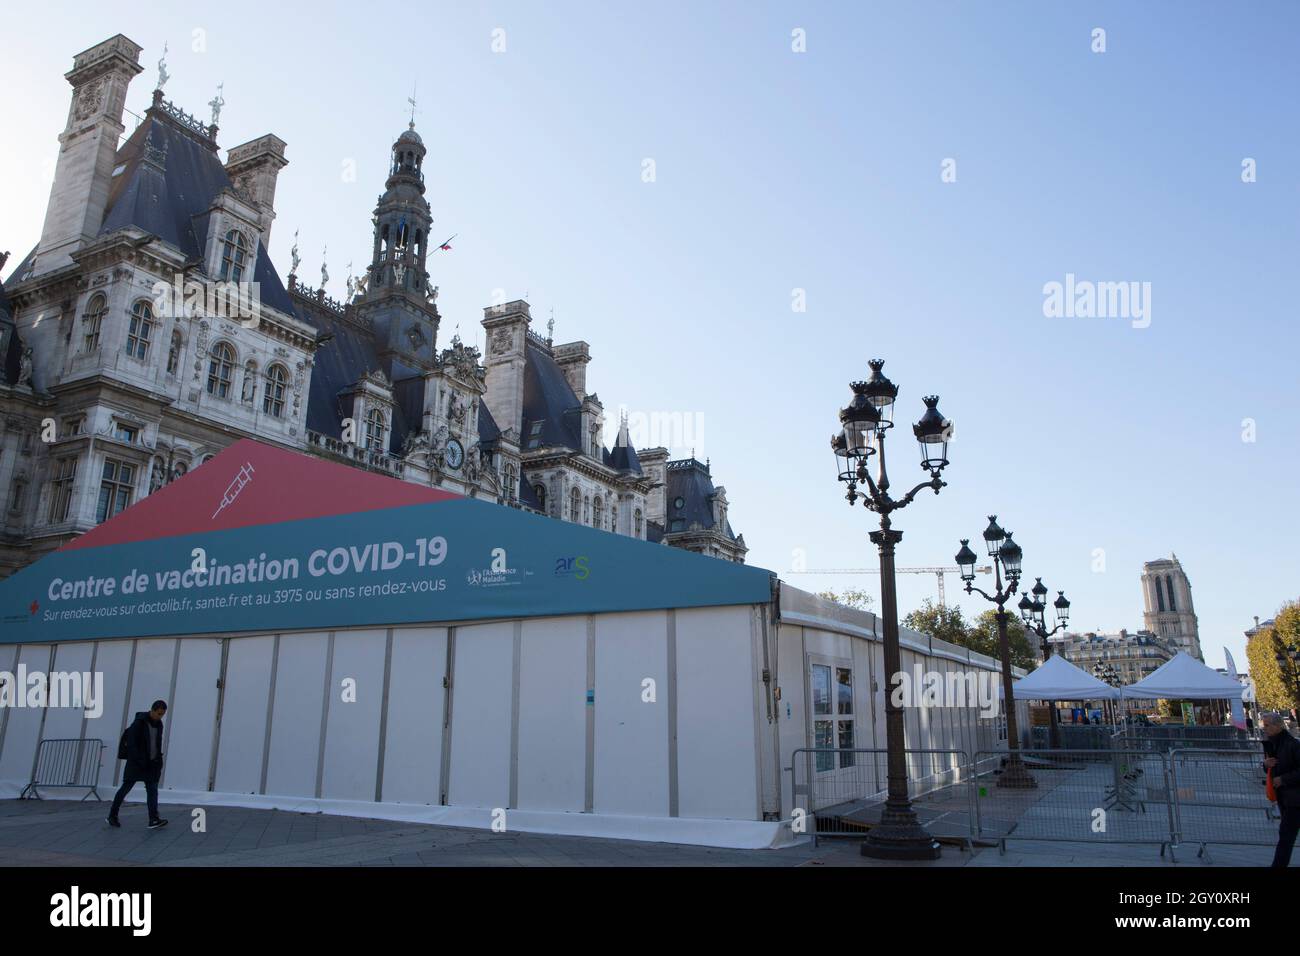 Paris, France, 4 October 2021: A vaccination centre has been set up outside the Hotel de Ville in central Paris, housed in a large marquee. Anna Watson/Alamy Live News Stock Photo